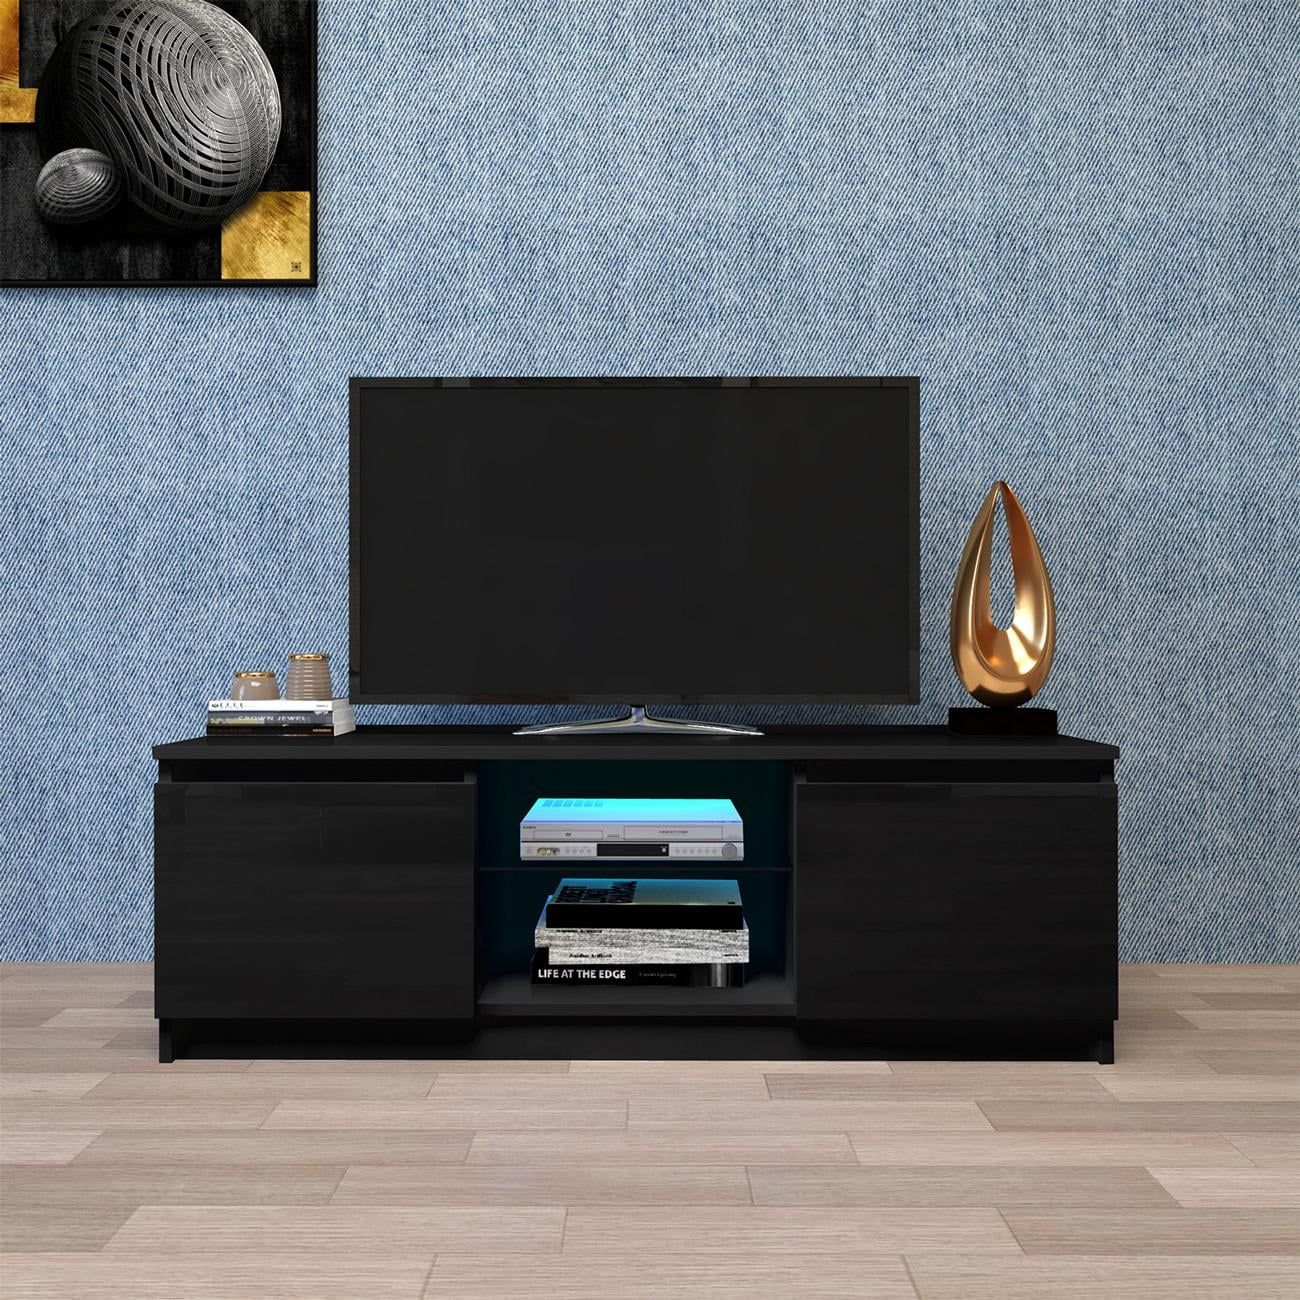 Tv Stand With Storage Drawers Shelves Led Rgb Lights, For Flat Tv 40 55 For Rgb Tv Entertainment Centers (Gallery 3 of 20)